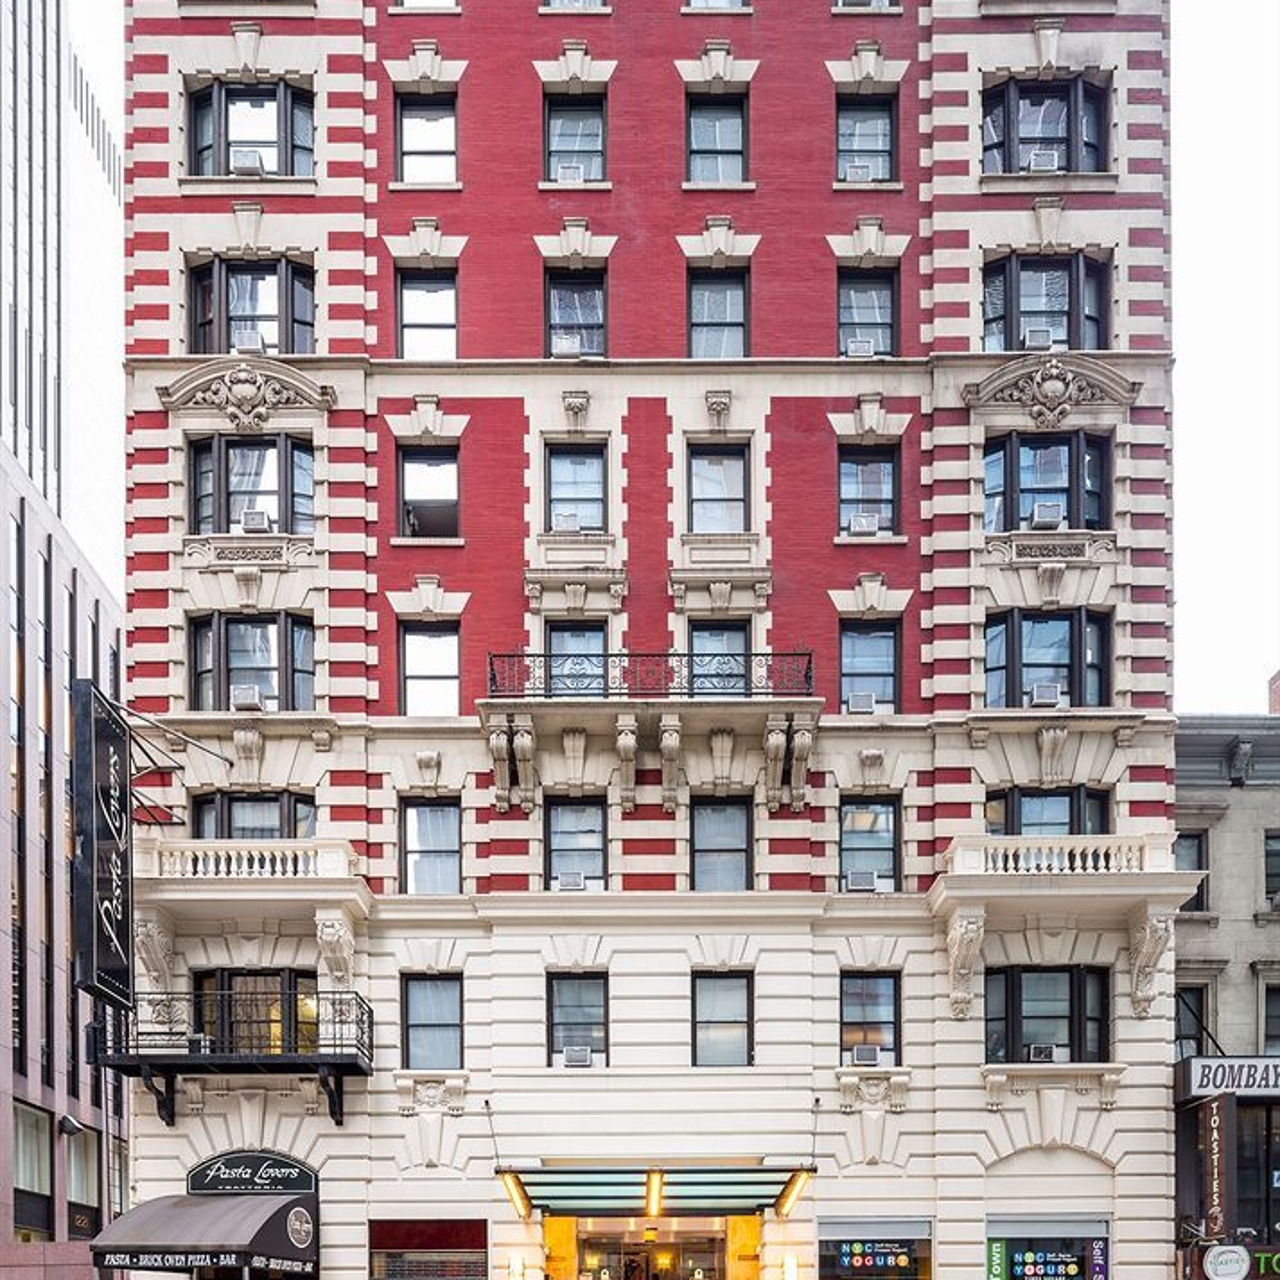 Hotel Radio City Apartments - 3 HRS star hotel in New York (New York)